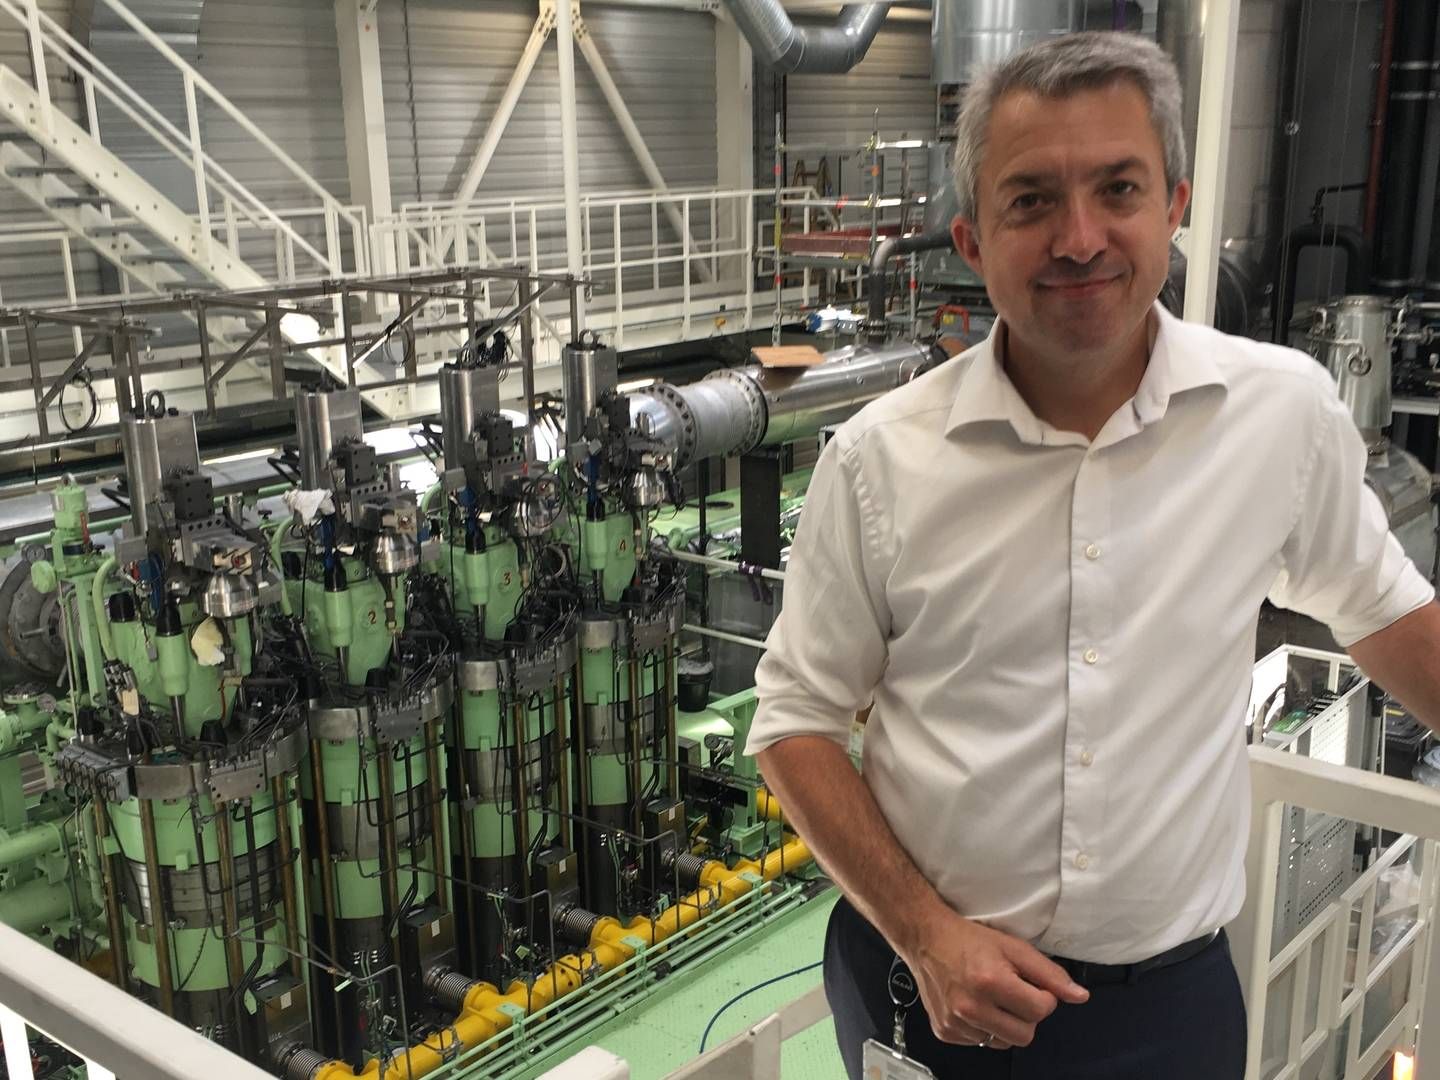 Brian Østergaard Sørensen, head of R&D for two-stroke engines at MAN, in front of a new test engine, which MAN will use in the development of ship engines. | Photo: ShippingWatch